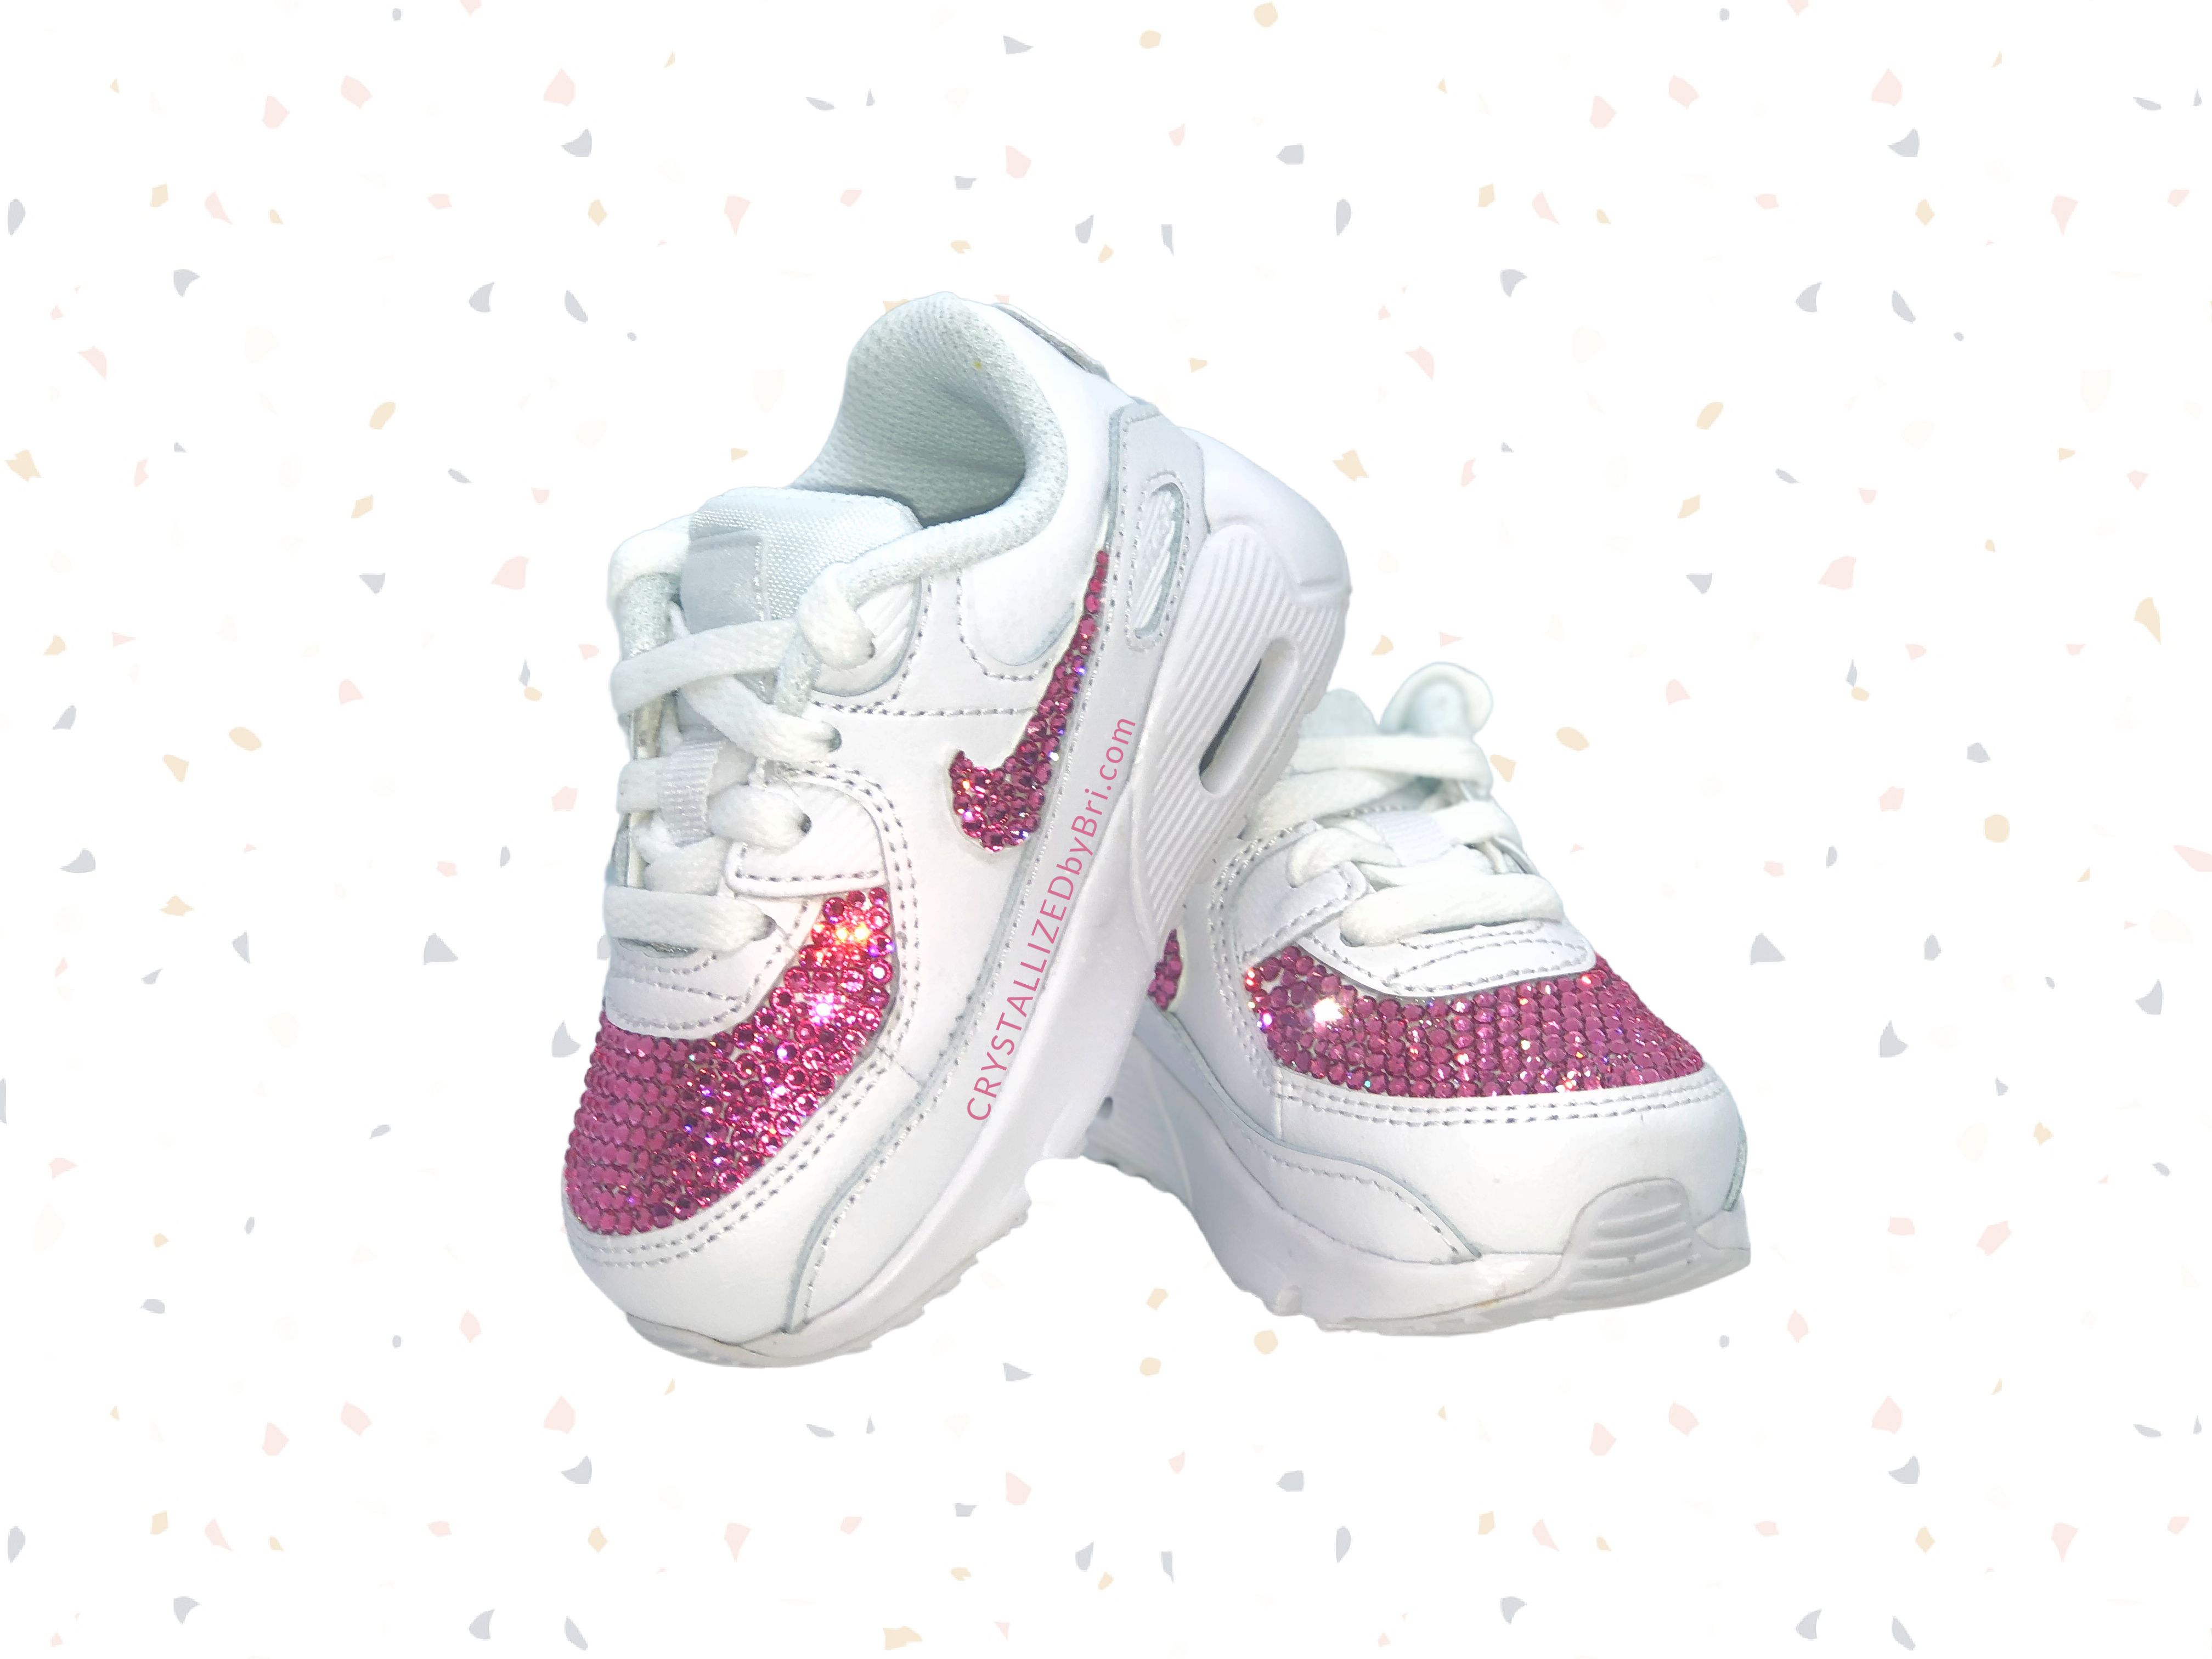 bestå Rug tempereret Handmade Pink Baby Nike's Crystals Crystallized Sneakers Custom Bling Shoes  Genuine European Bedazzled by CRYSTALL!ZED by Bri, LLC | CustomMade.com